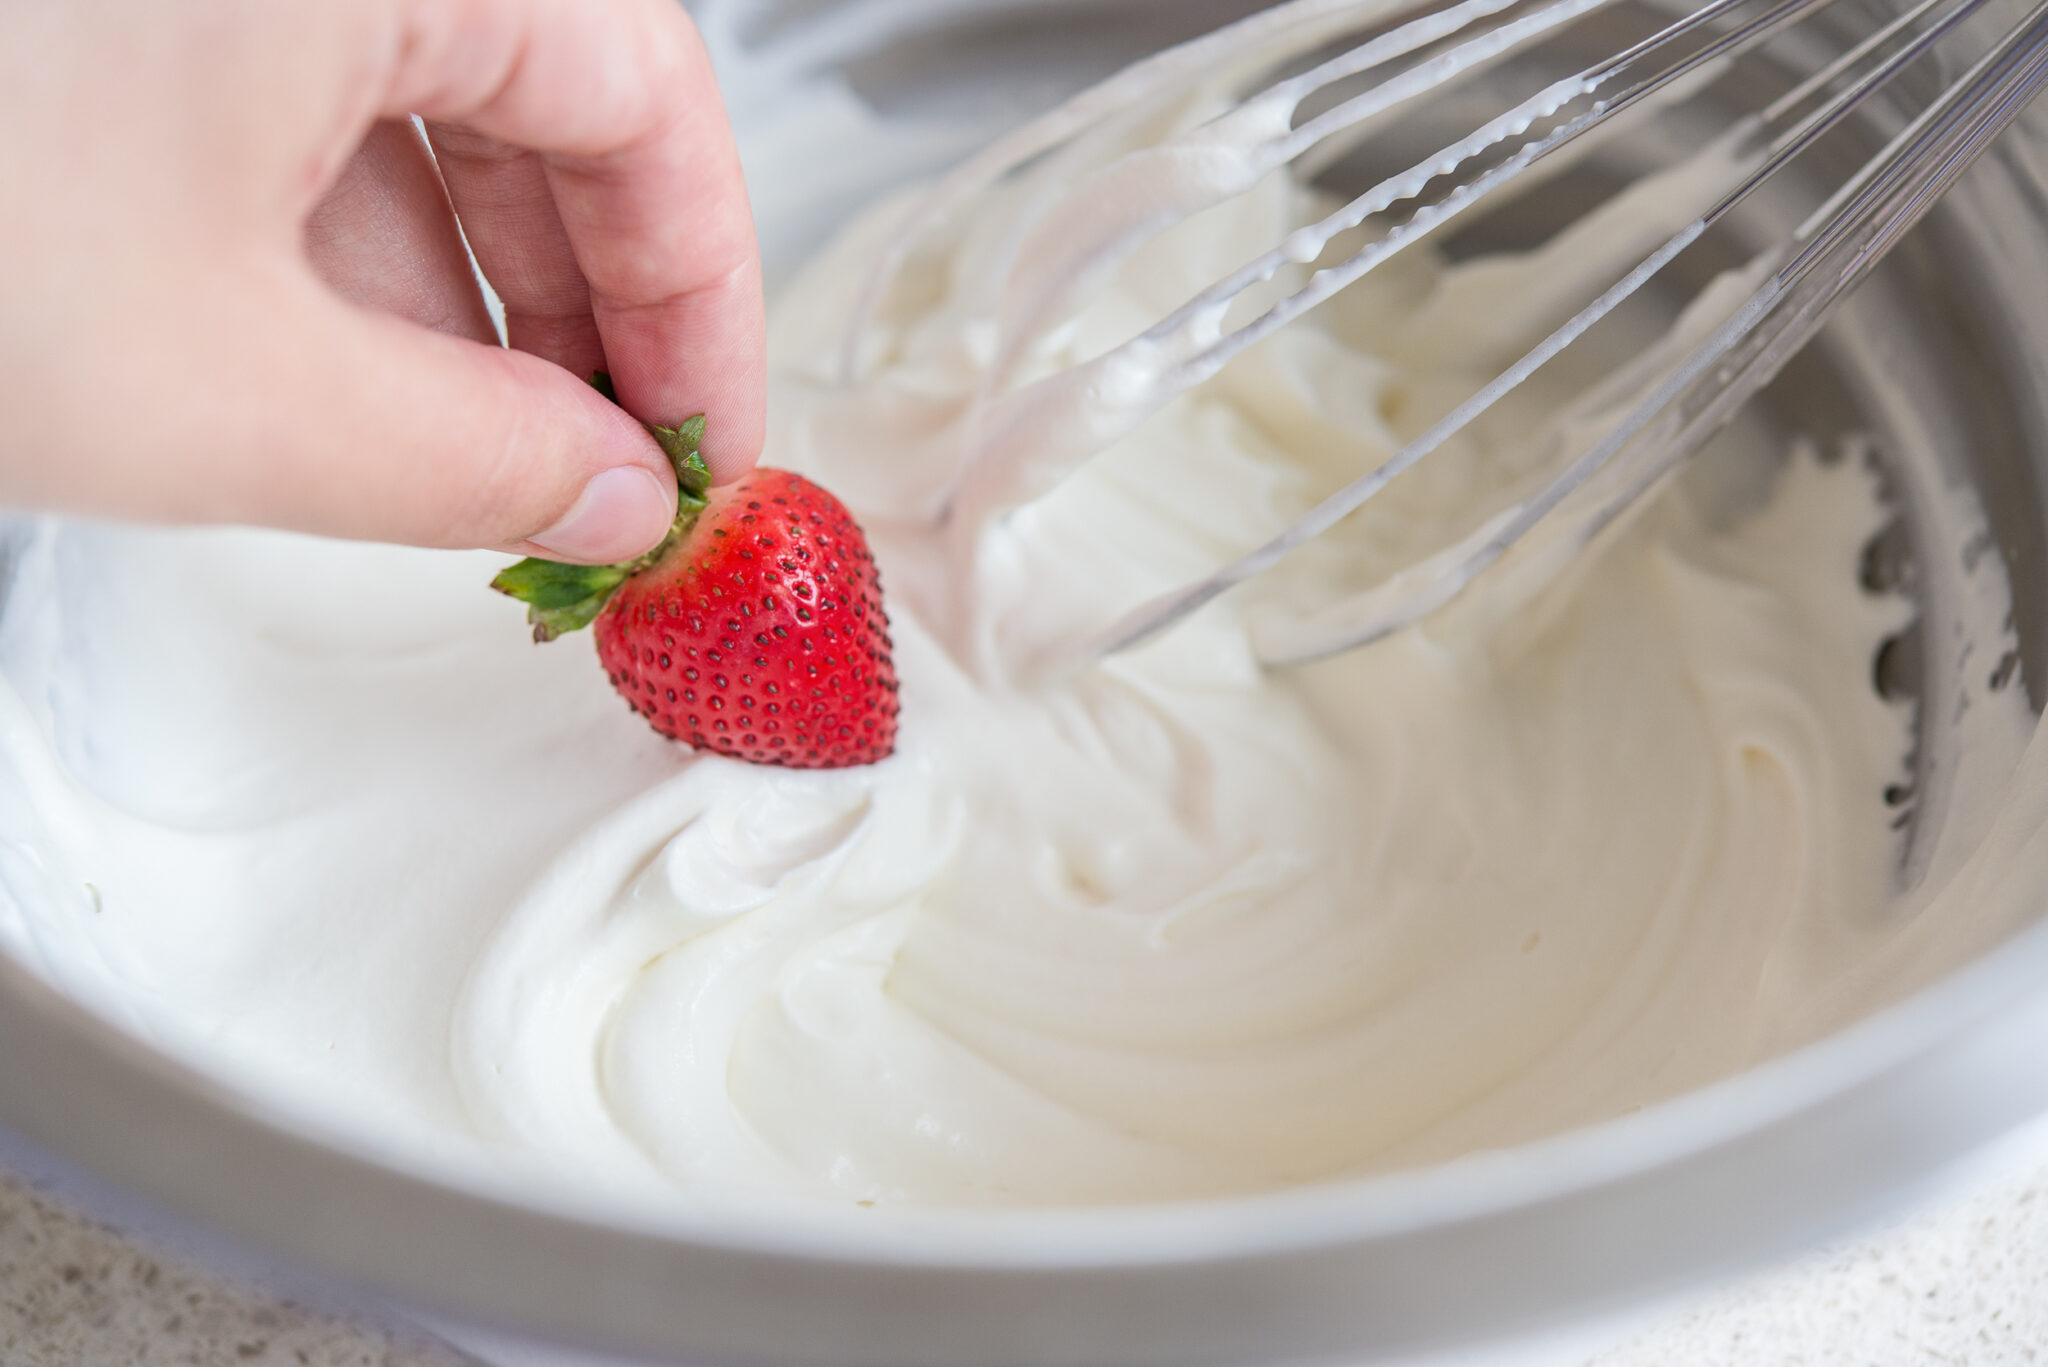 How to Make Whipped Cream at Home